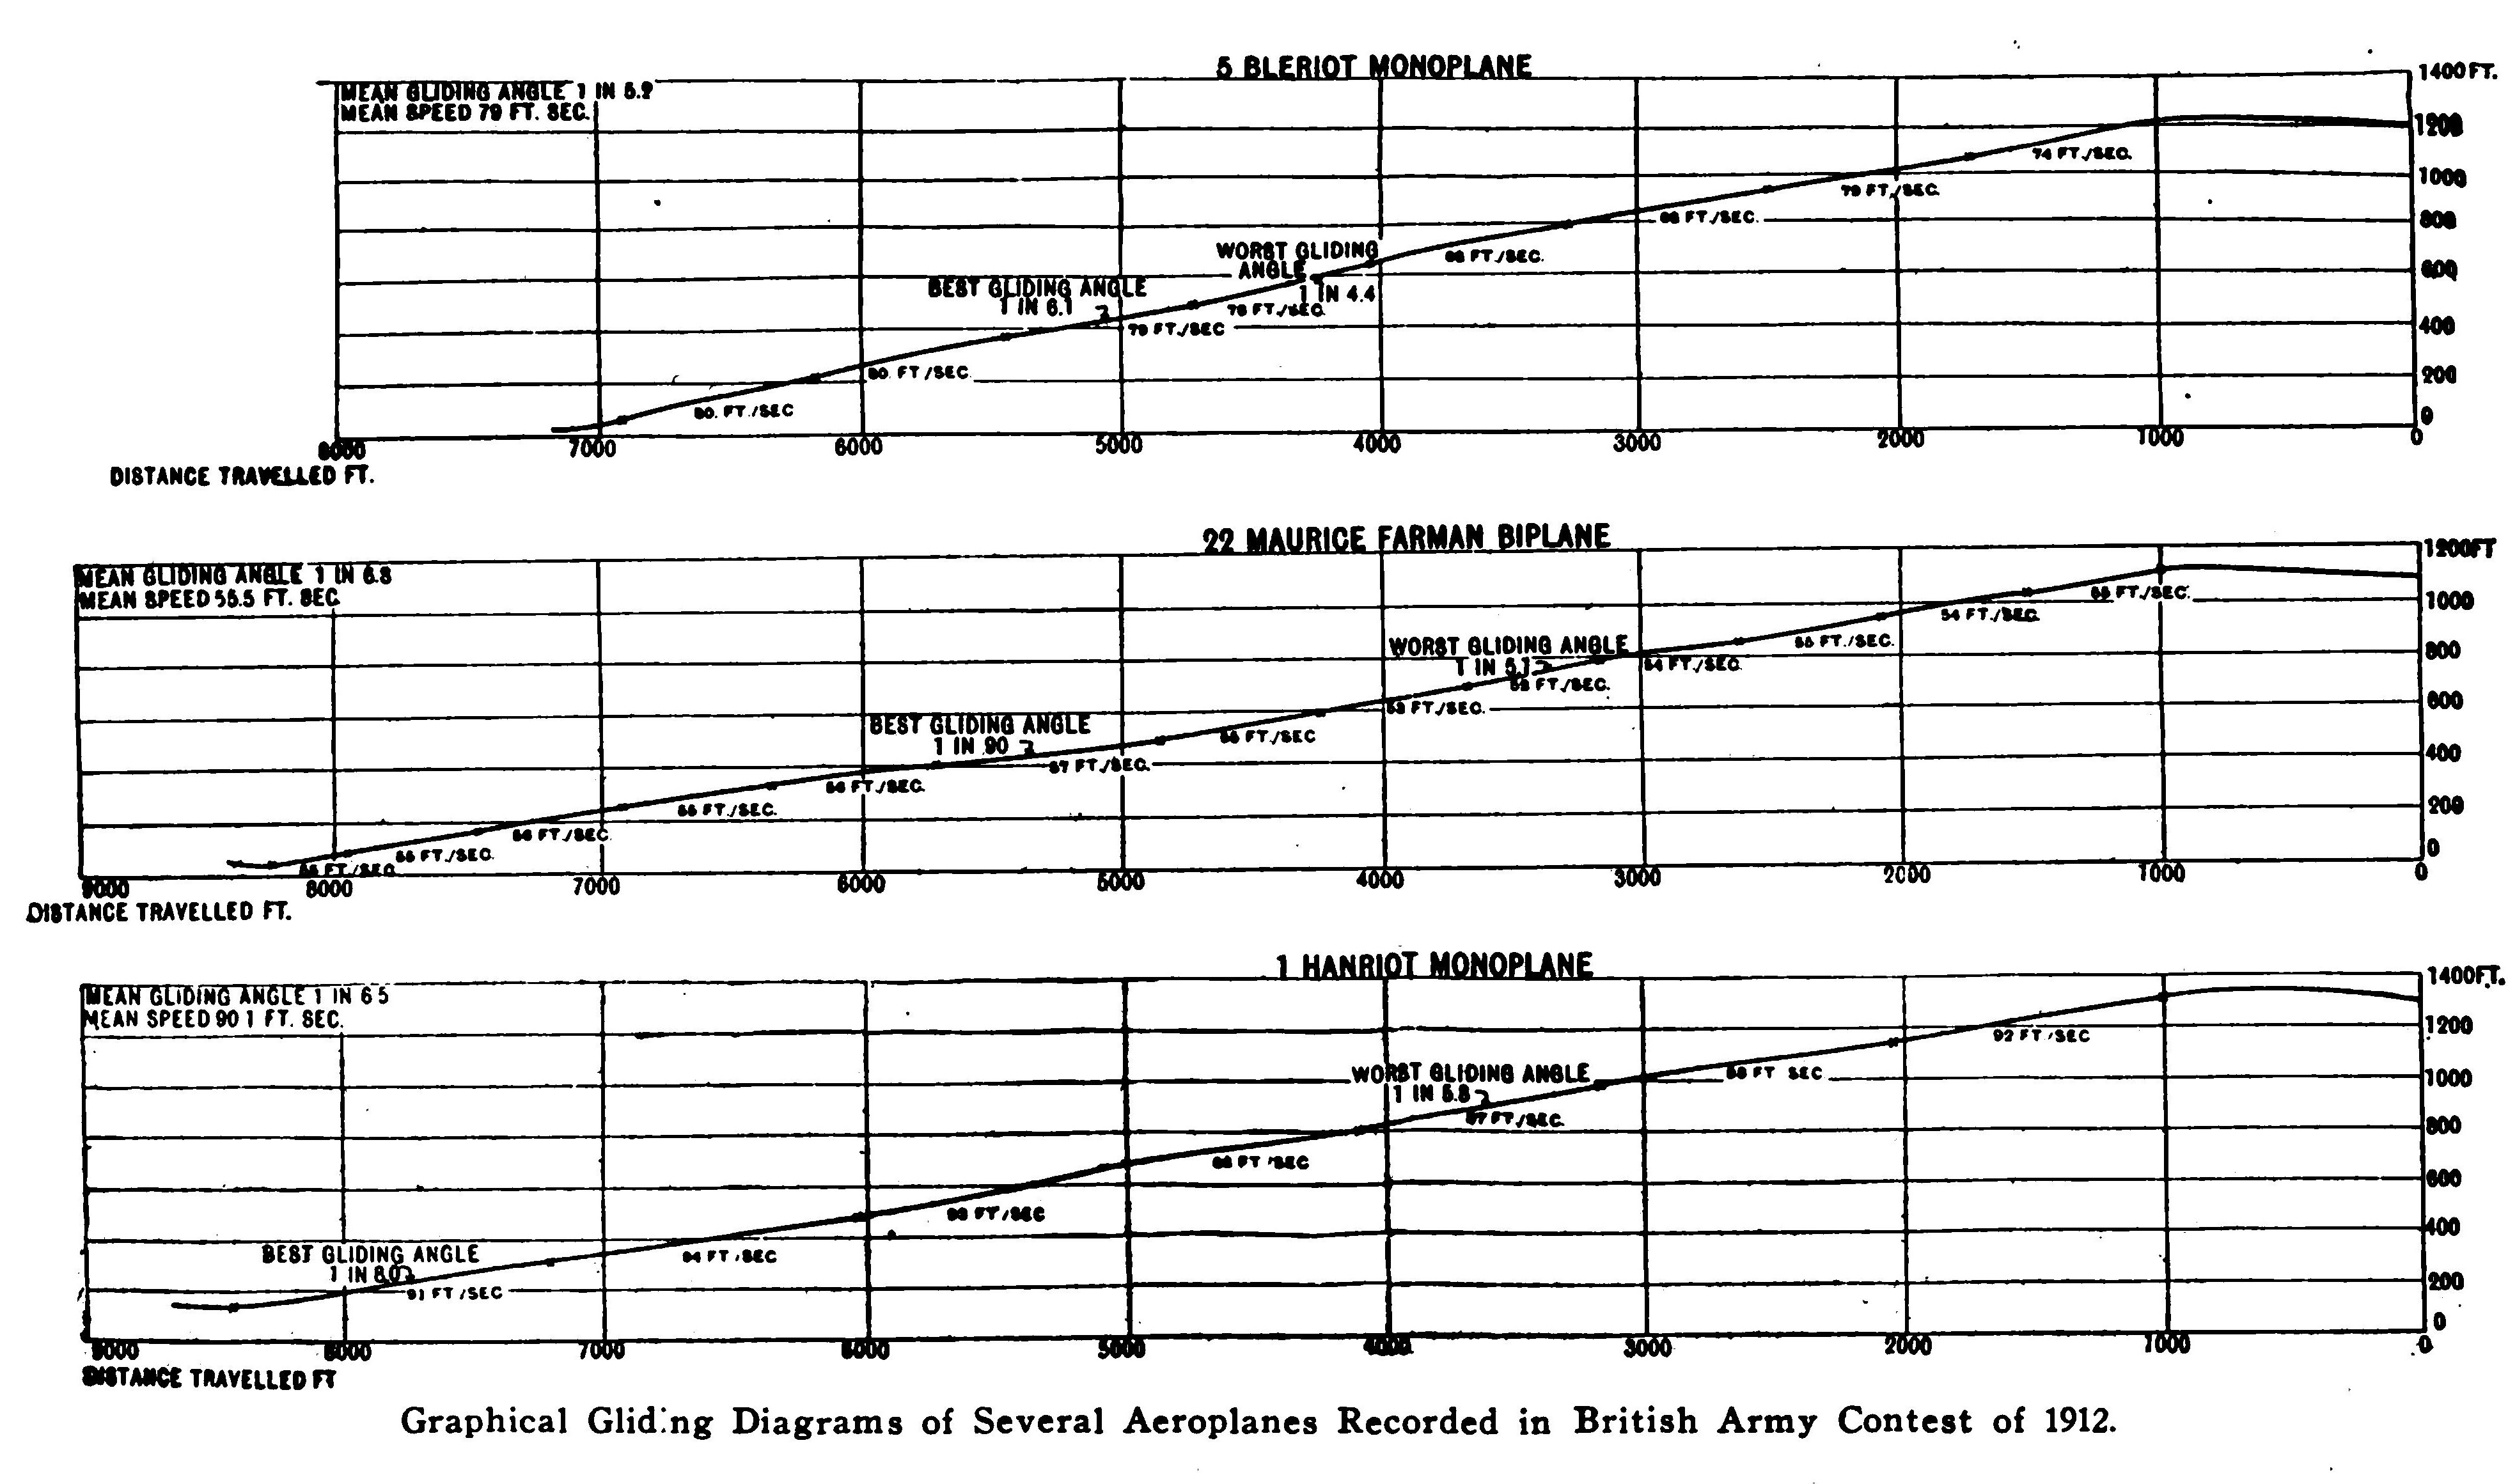 Graphical Gliding Diagrams of Several Aeroplanes Recorded in British Army Contest of 1912.